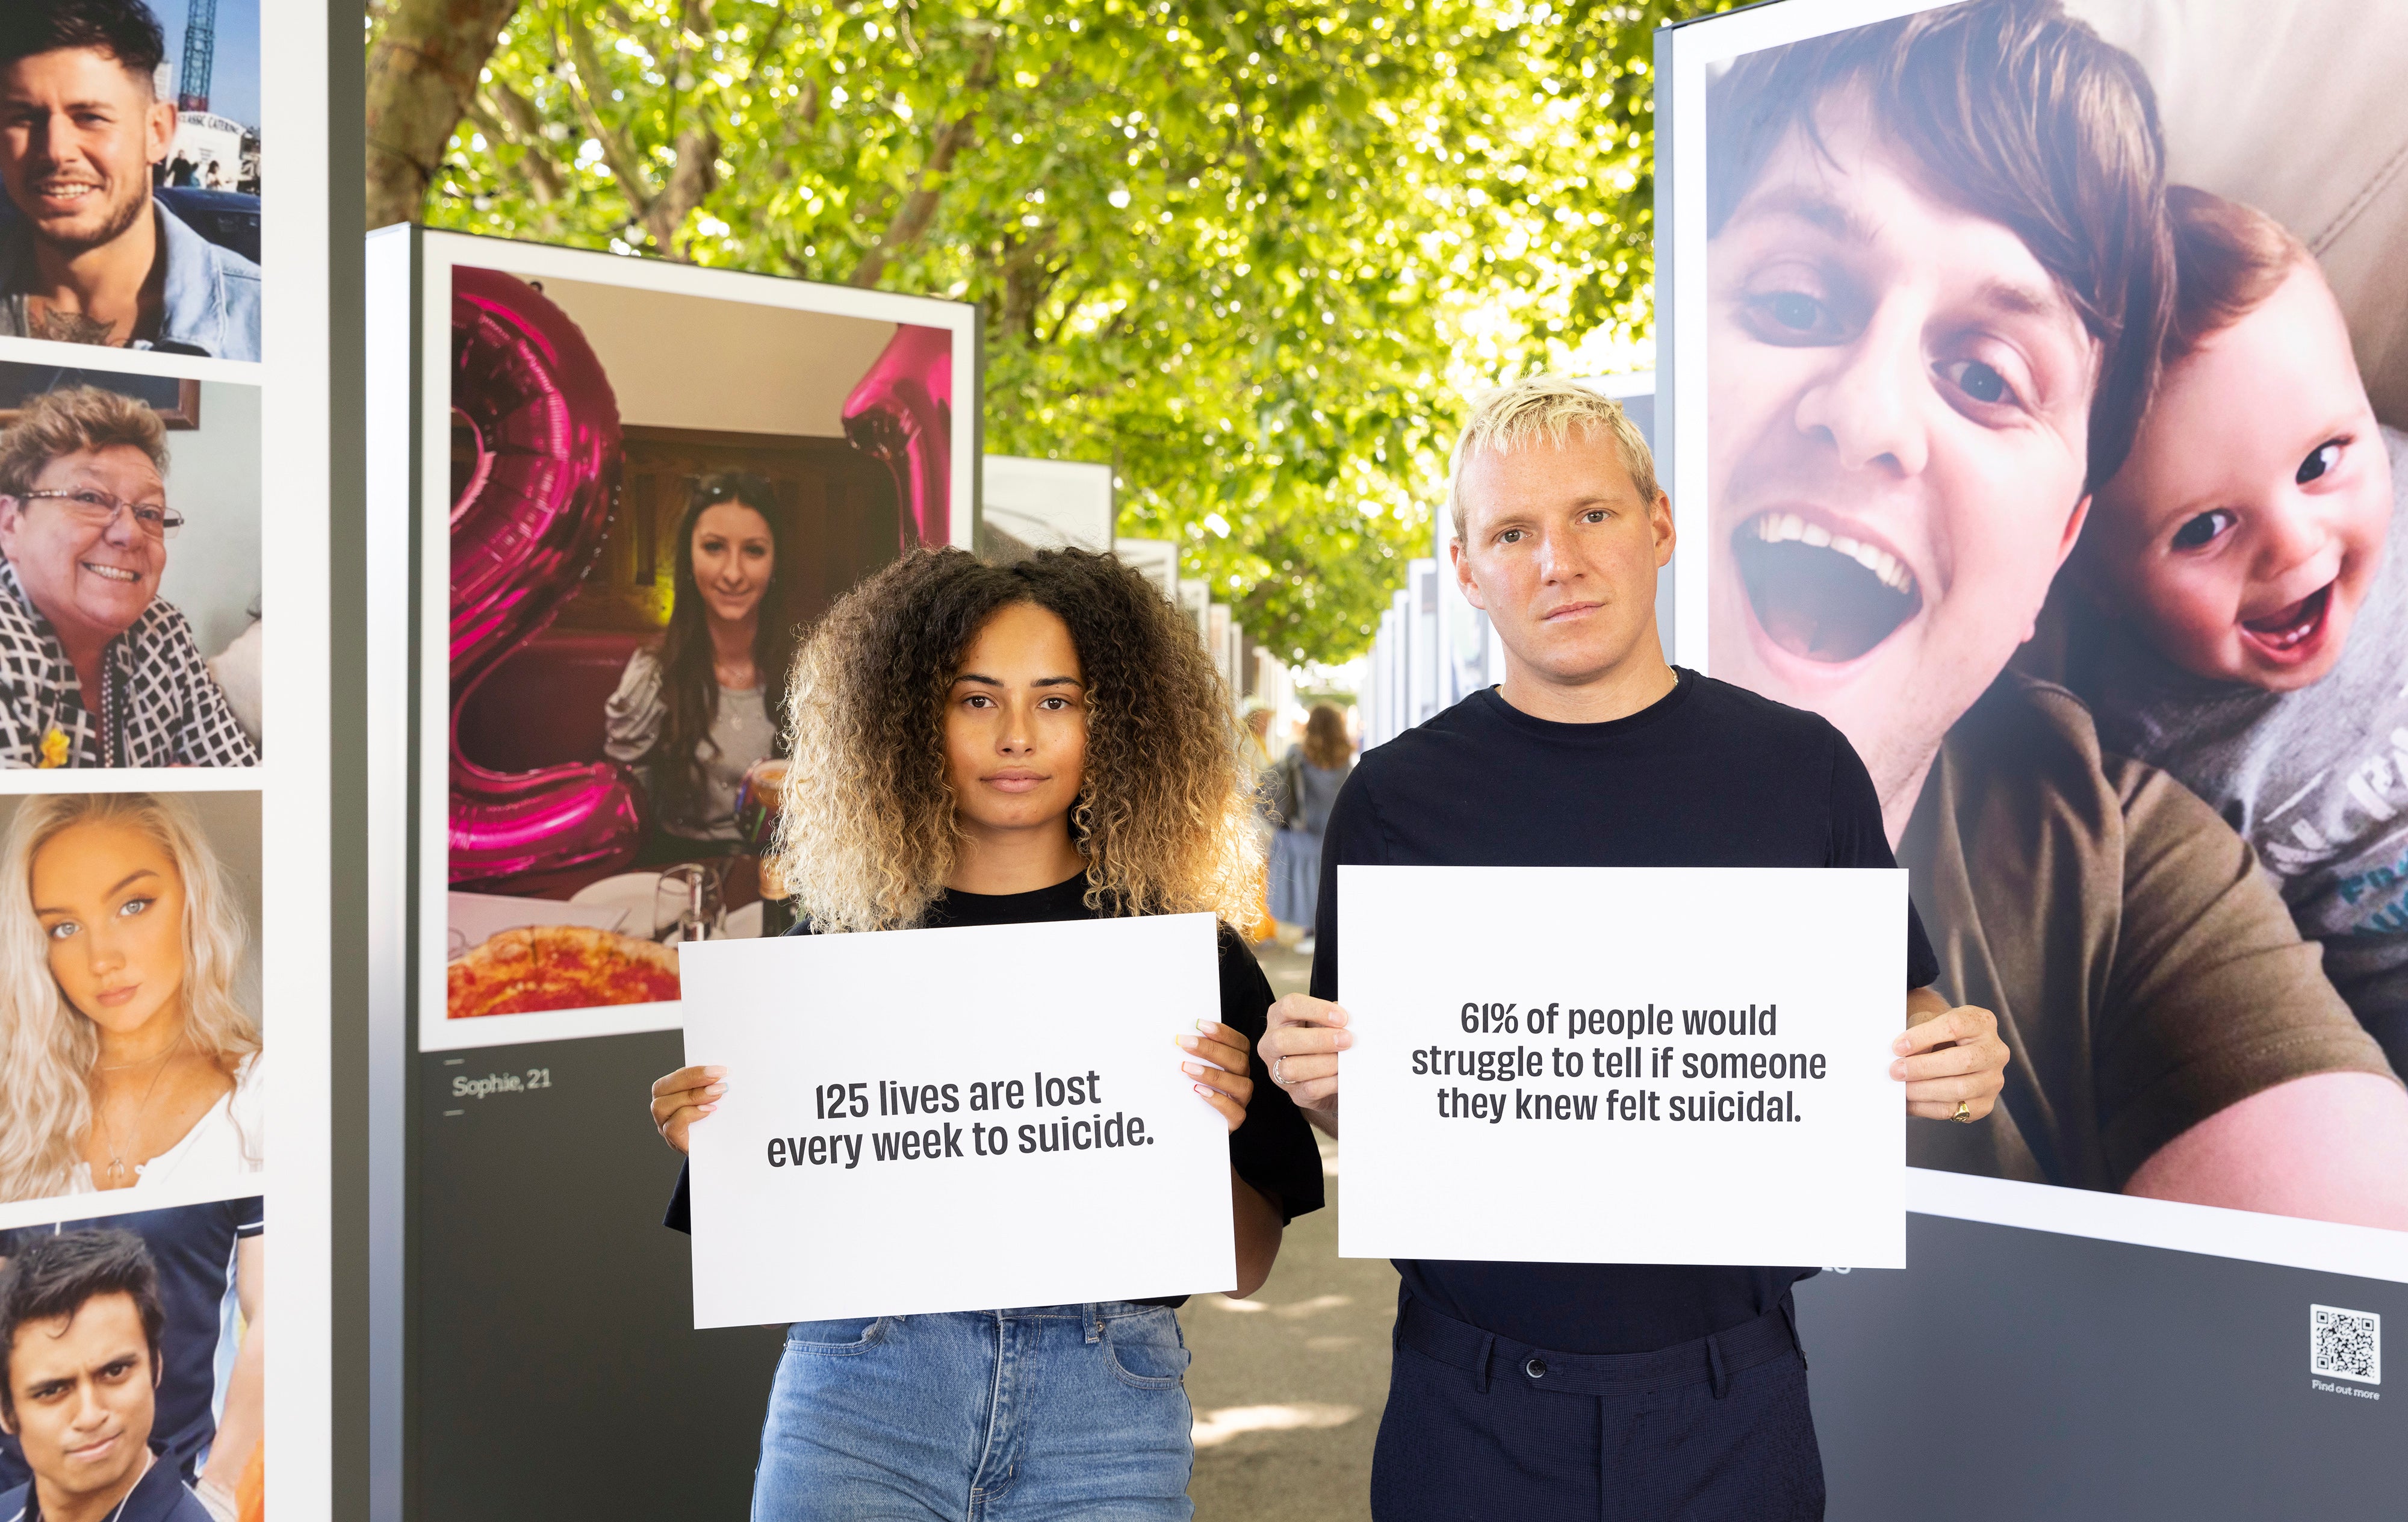 Jamie Laing and Amber Gill at The Last Photo exhibition